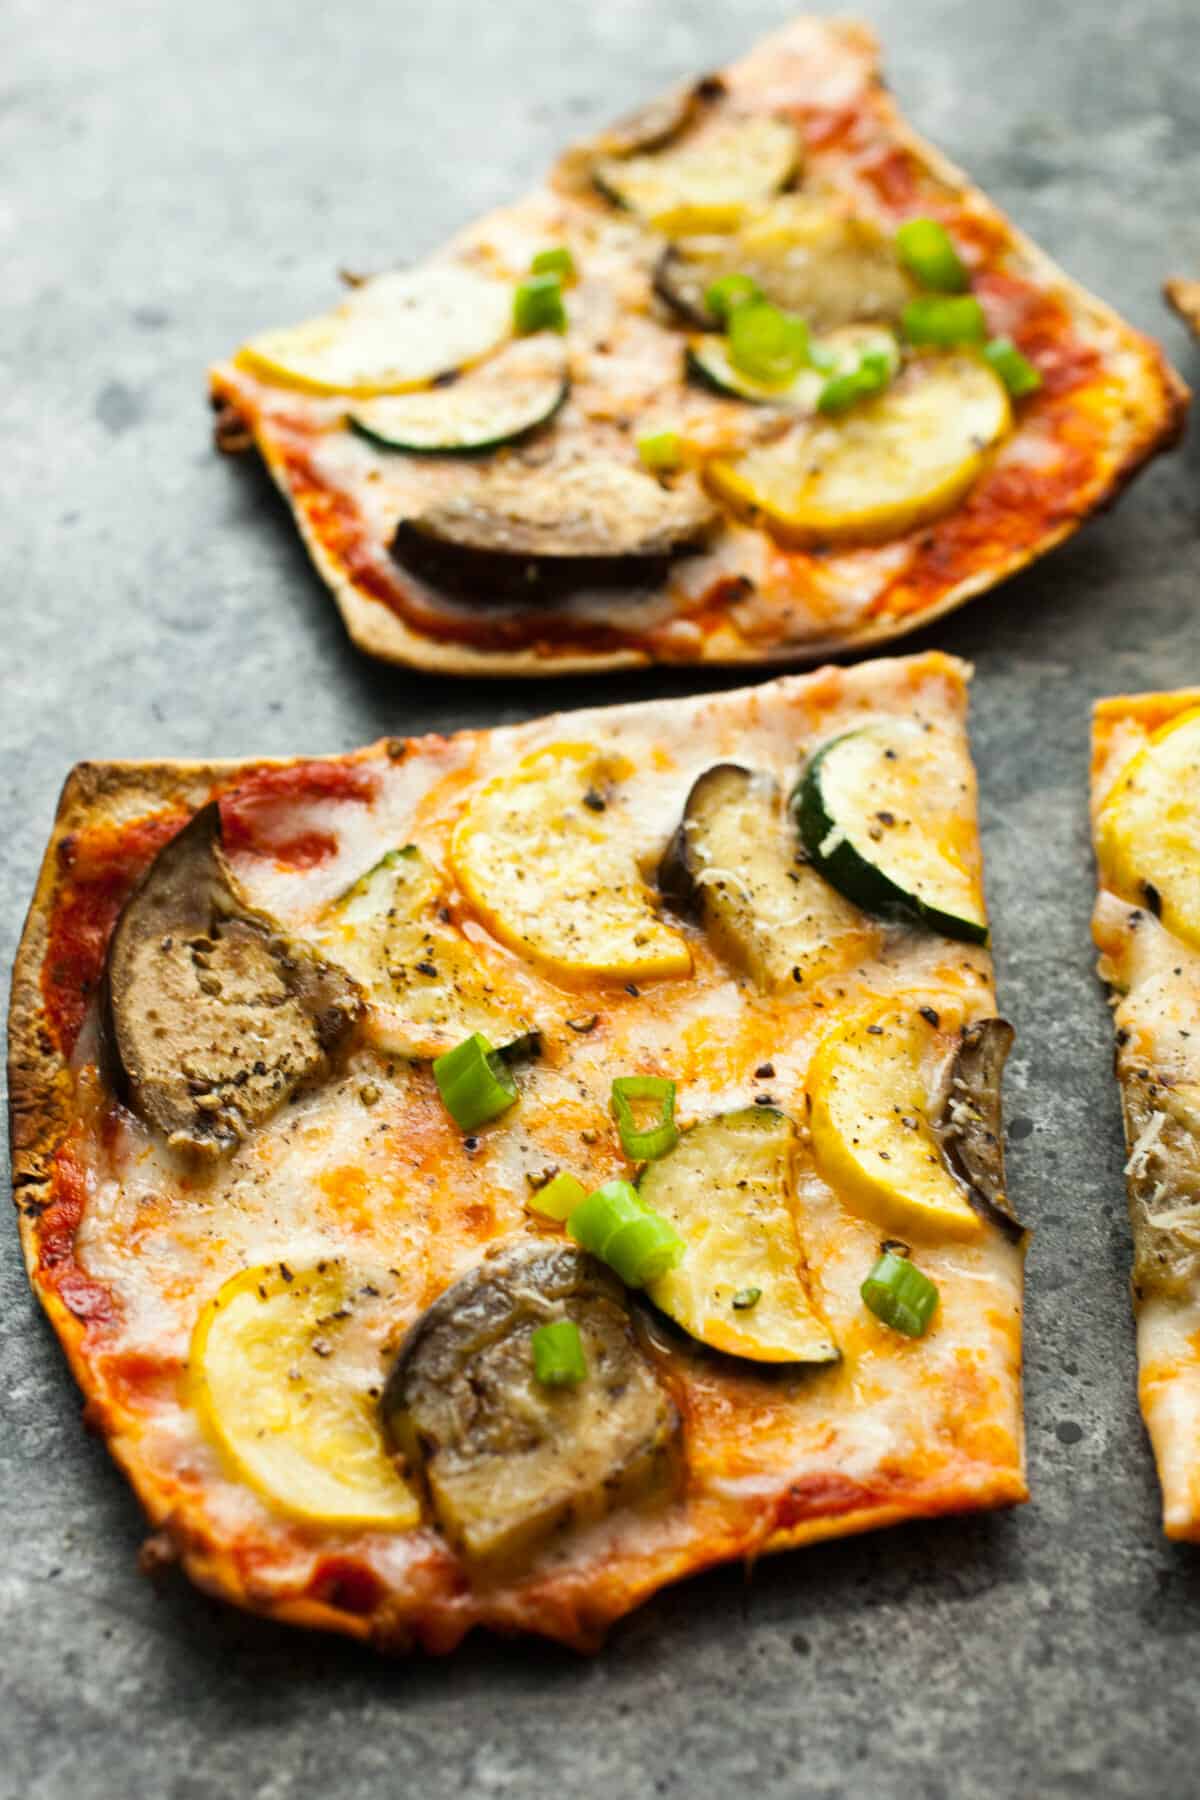 Grilled Ratatouille Pizza: This easy grilled pizza has a super-crispy crust and fresh ratatouille toppings (which are also grilled). Perfect for a summer cookout! | macheesmo.com